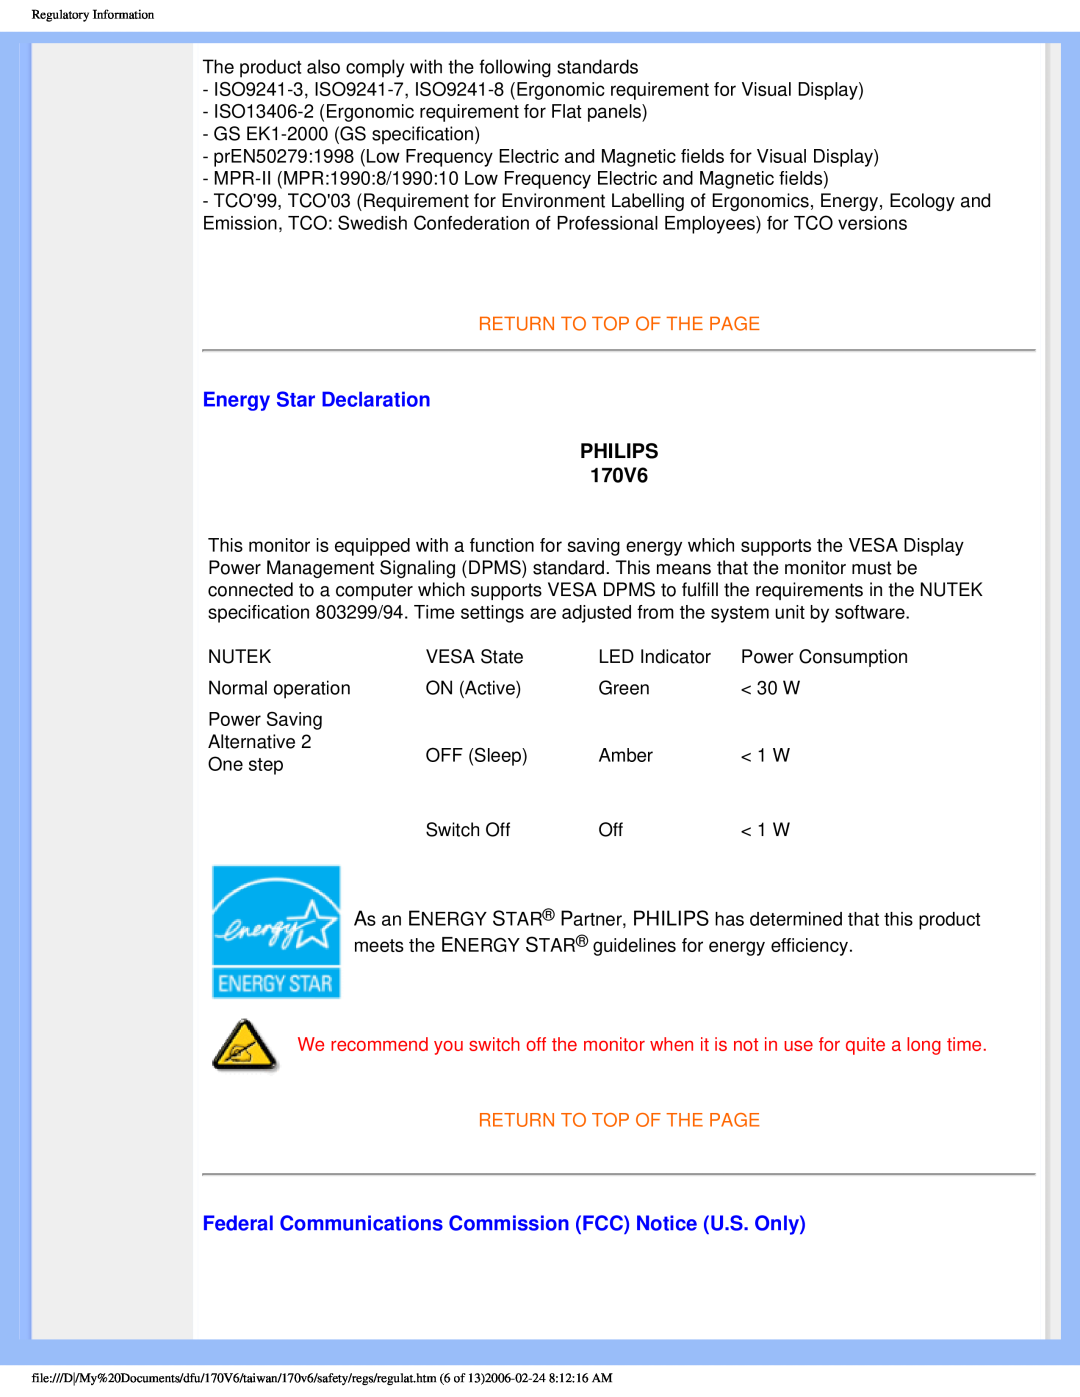 Philips user manual Energy Star Declaration, PHILIPS 170V6, Return To Top Of The Page 